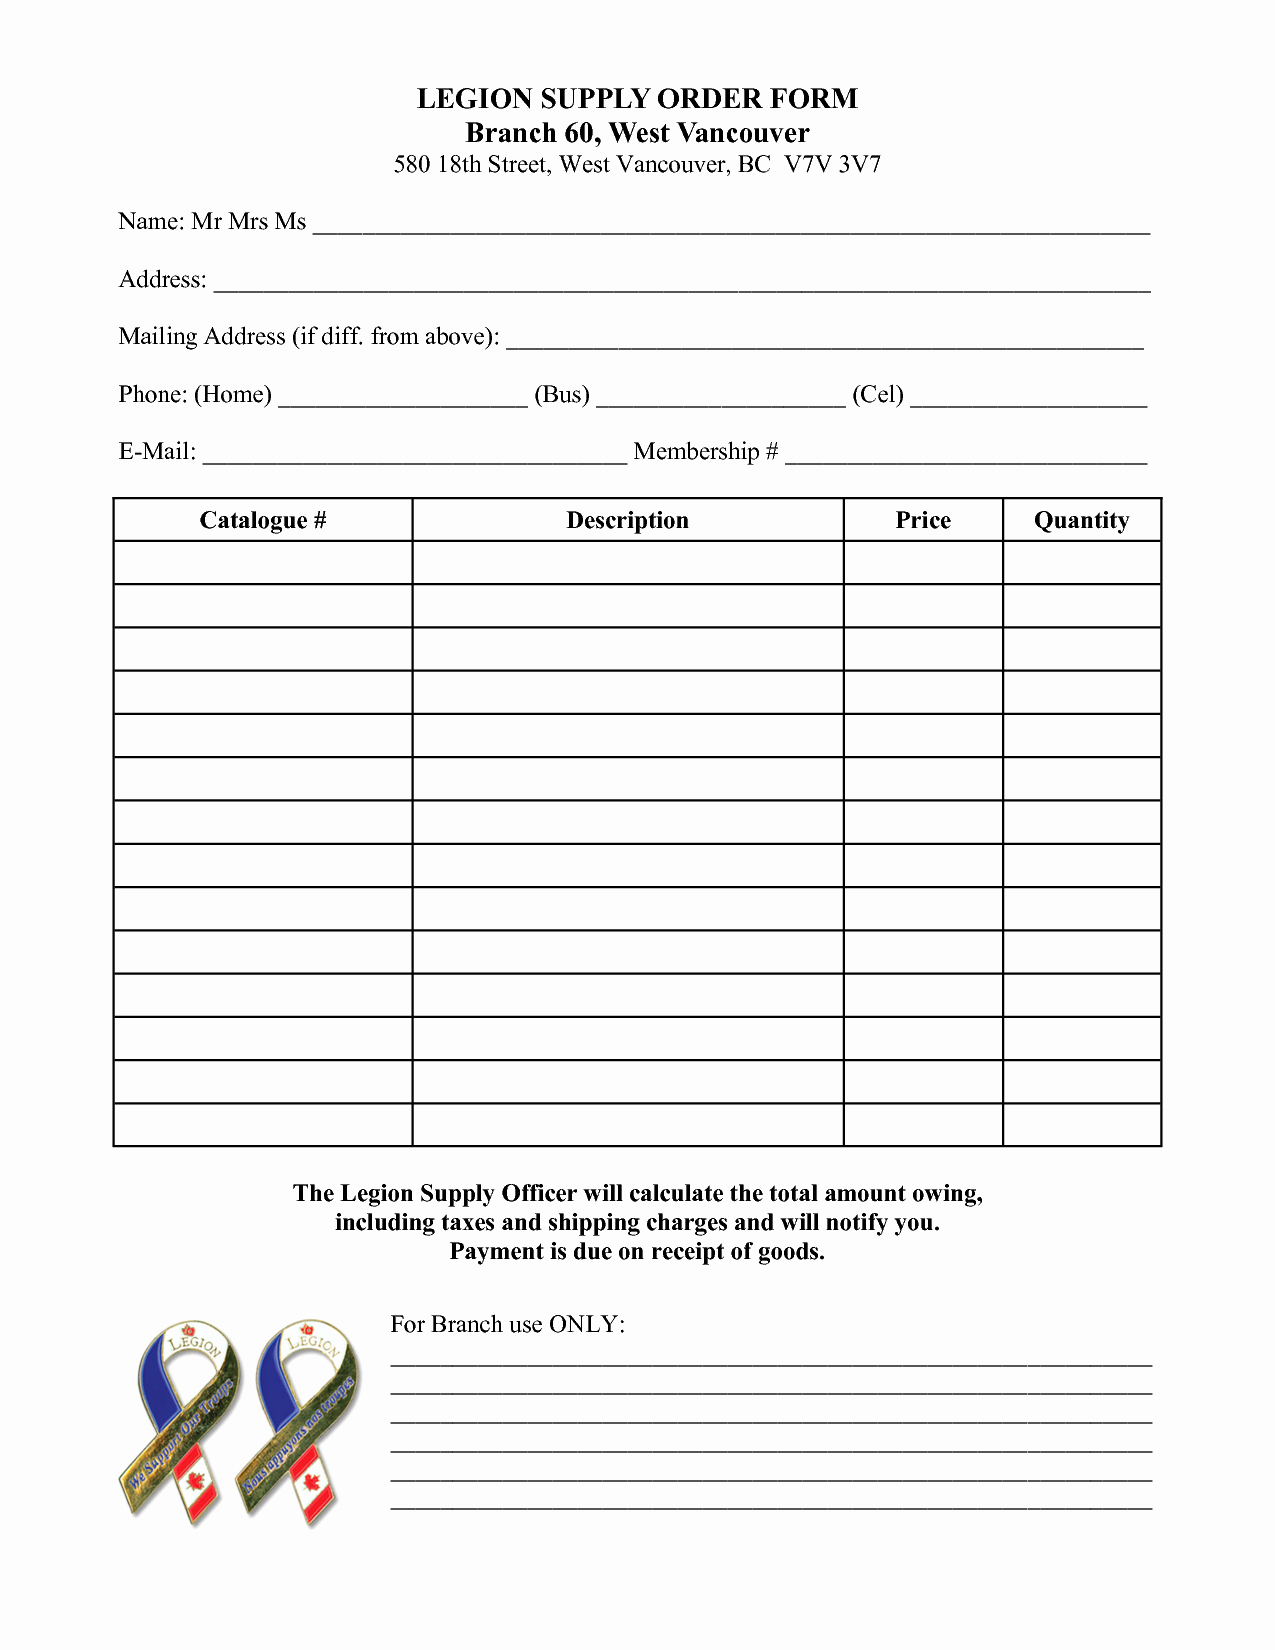 Supply order form Template Best Of Best S Of Fice Supply order form Template Fice